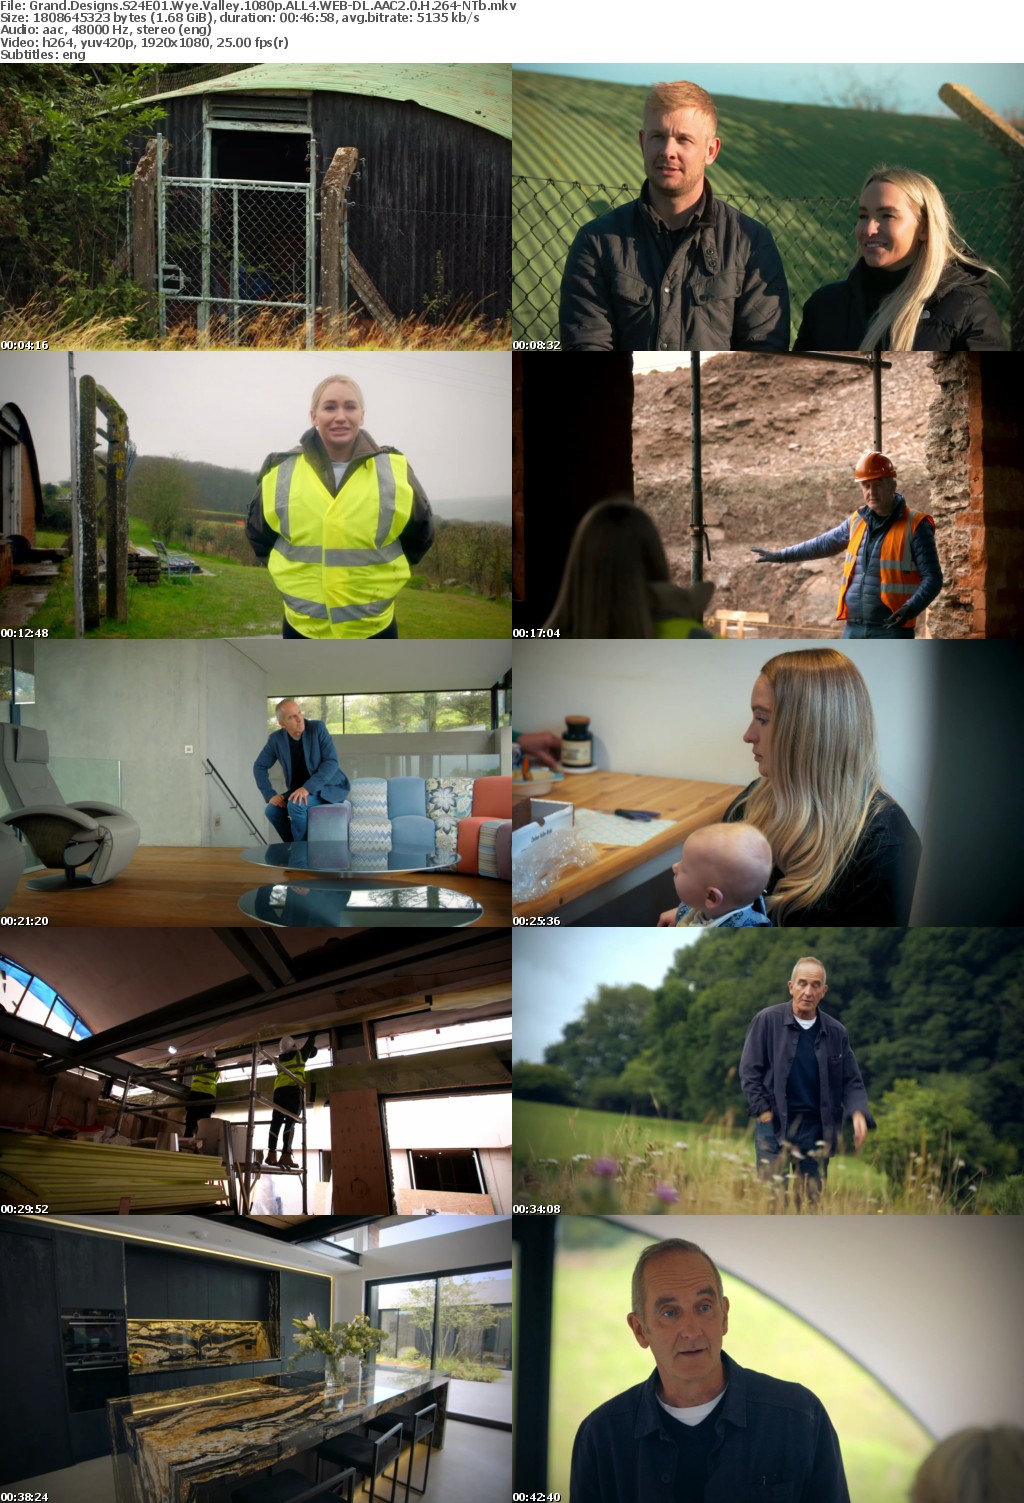 Grand Designs S24E01 Wye Valley 1080p ALL4 WEB-DL AAC2 0 H 264-NTb